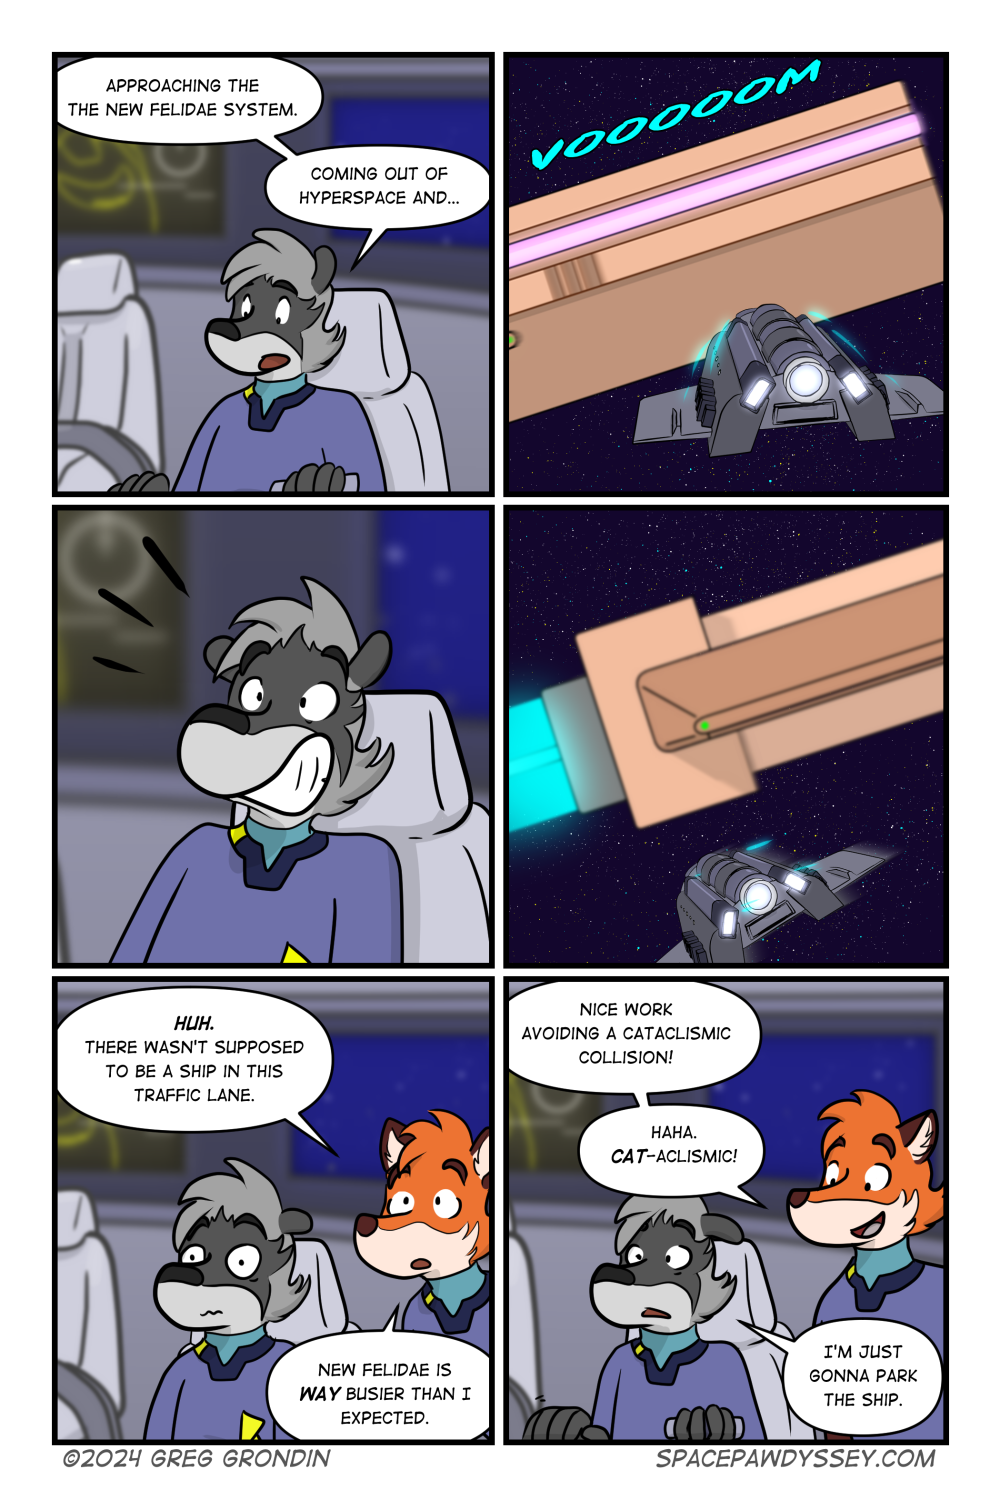 Space Pawdyssey #665